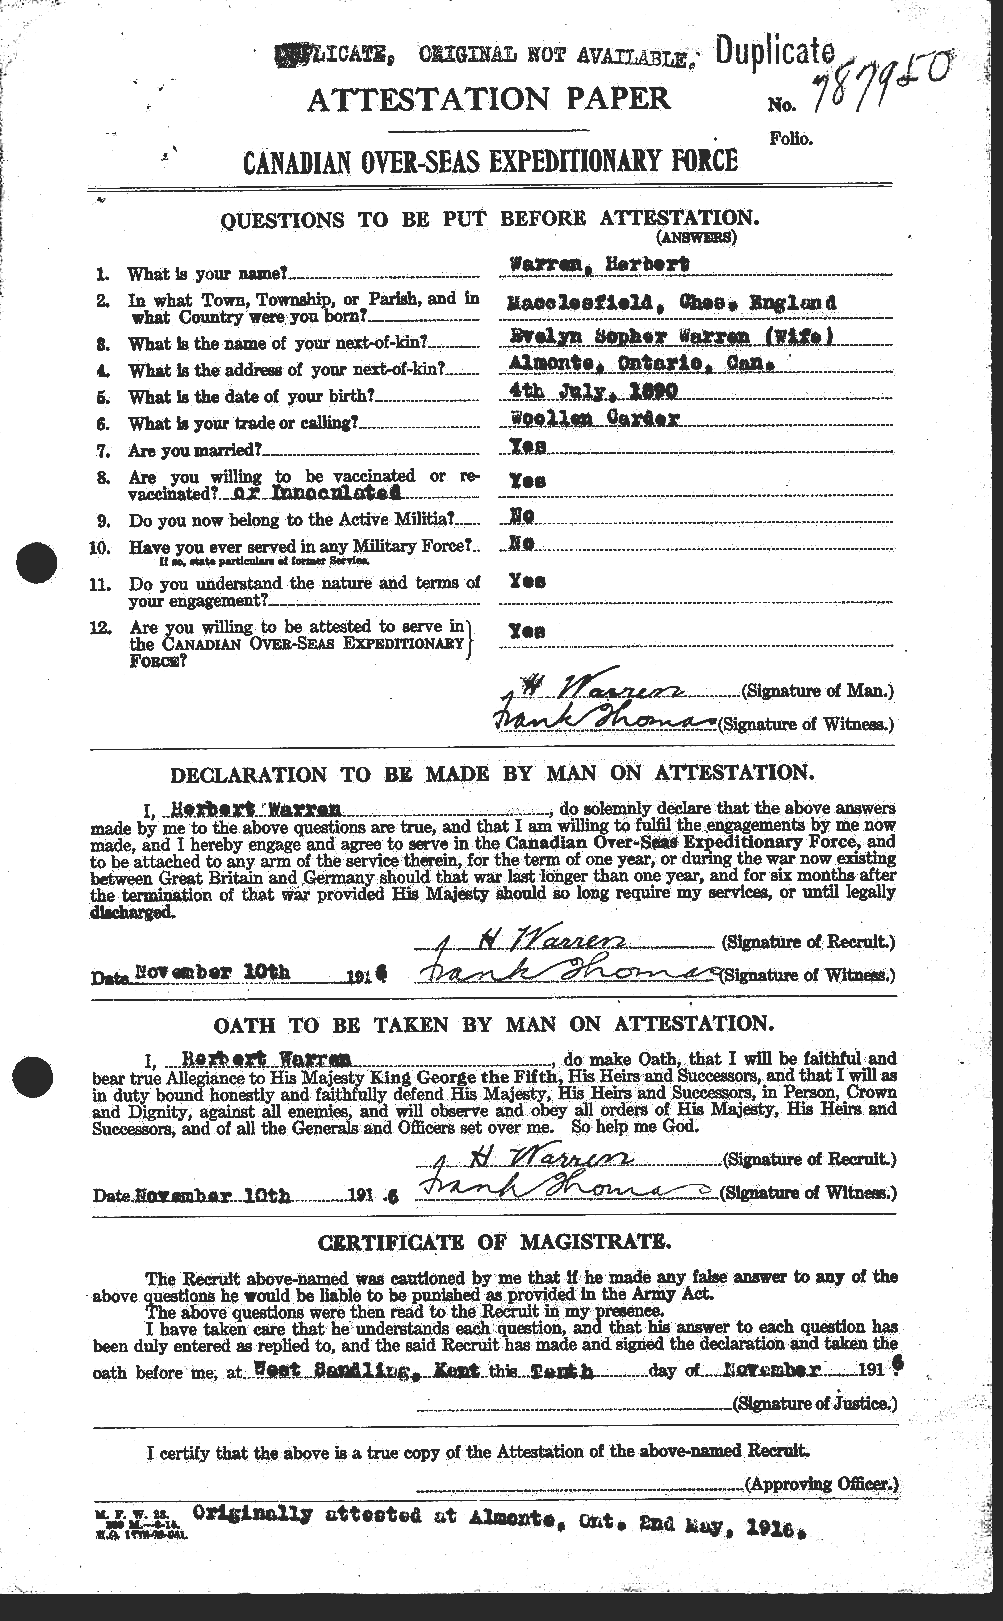 Personnel Records of the First World War - CEF 658499a